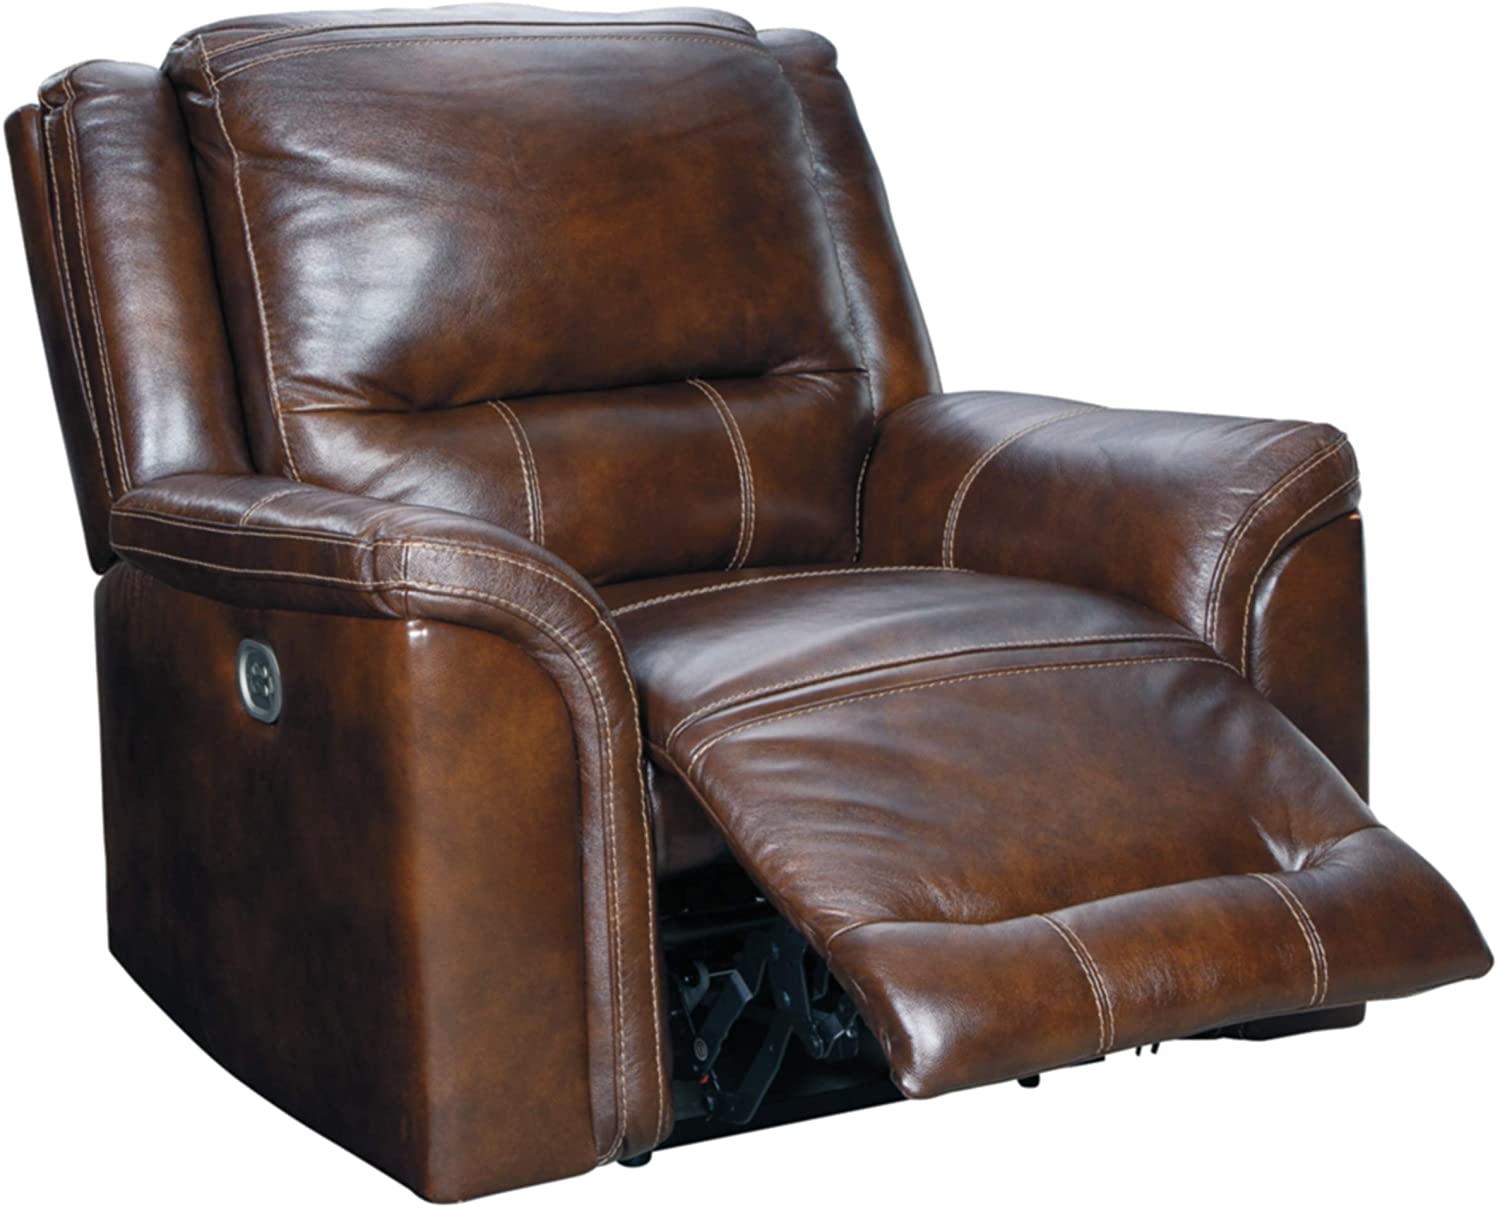 Signature design by Ashley power recliner